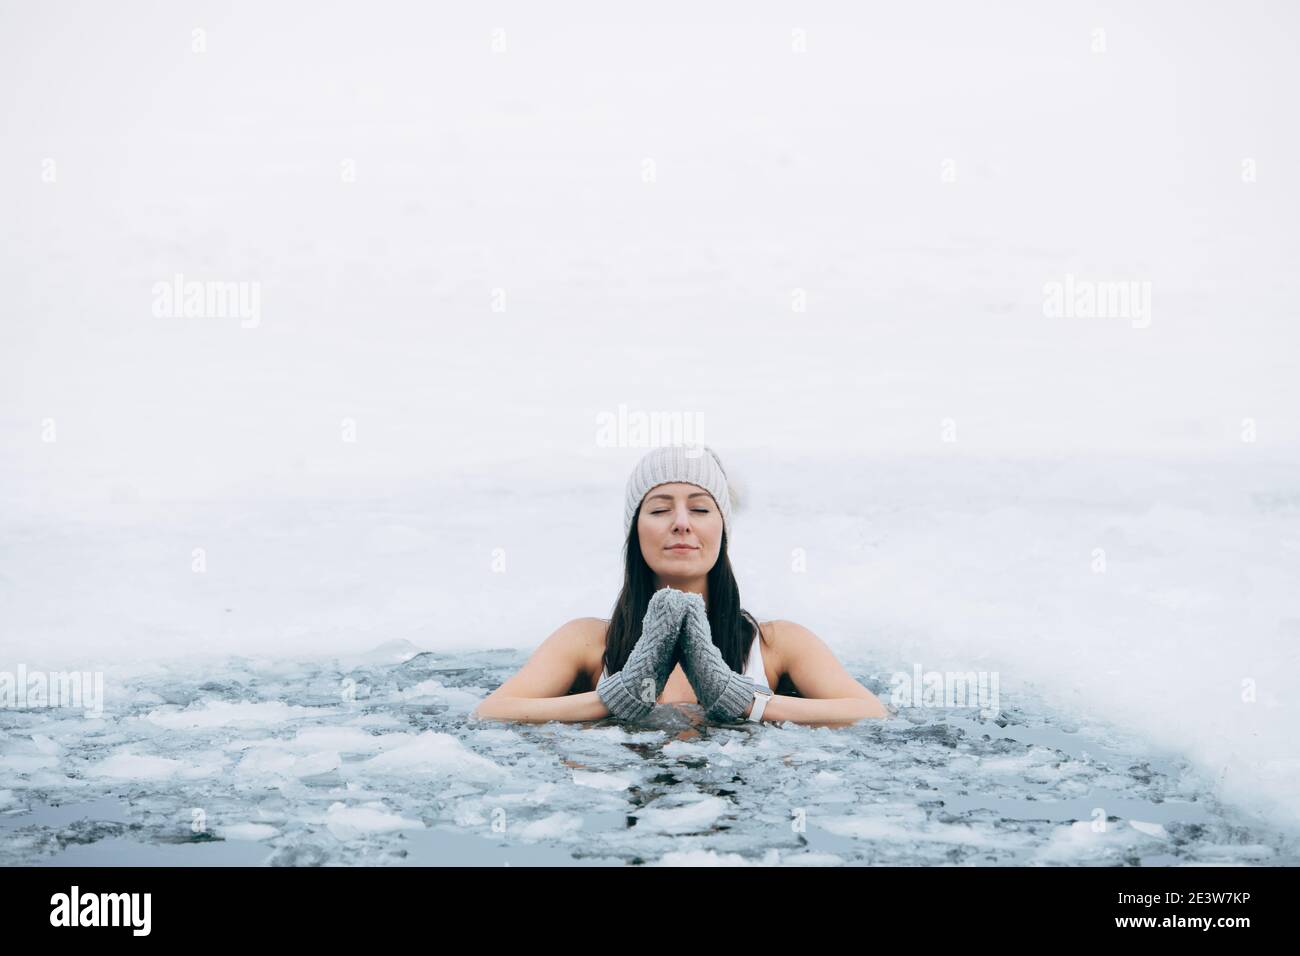 Winter swimming. Woman in frozen lake ice hole. How to swim in cold water. Beautiful young female in zen meditation. Hat and gloves swimming clothes. Stock Photo